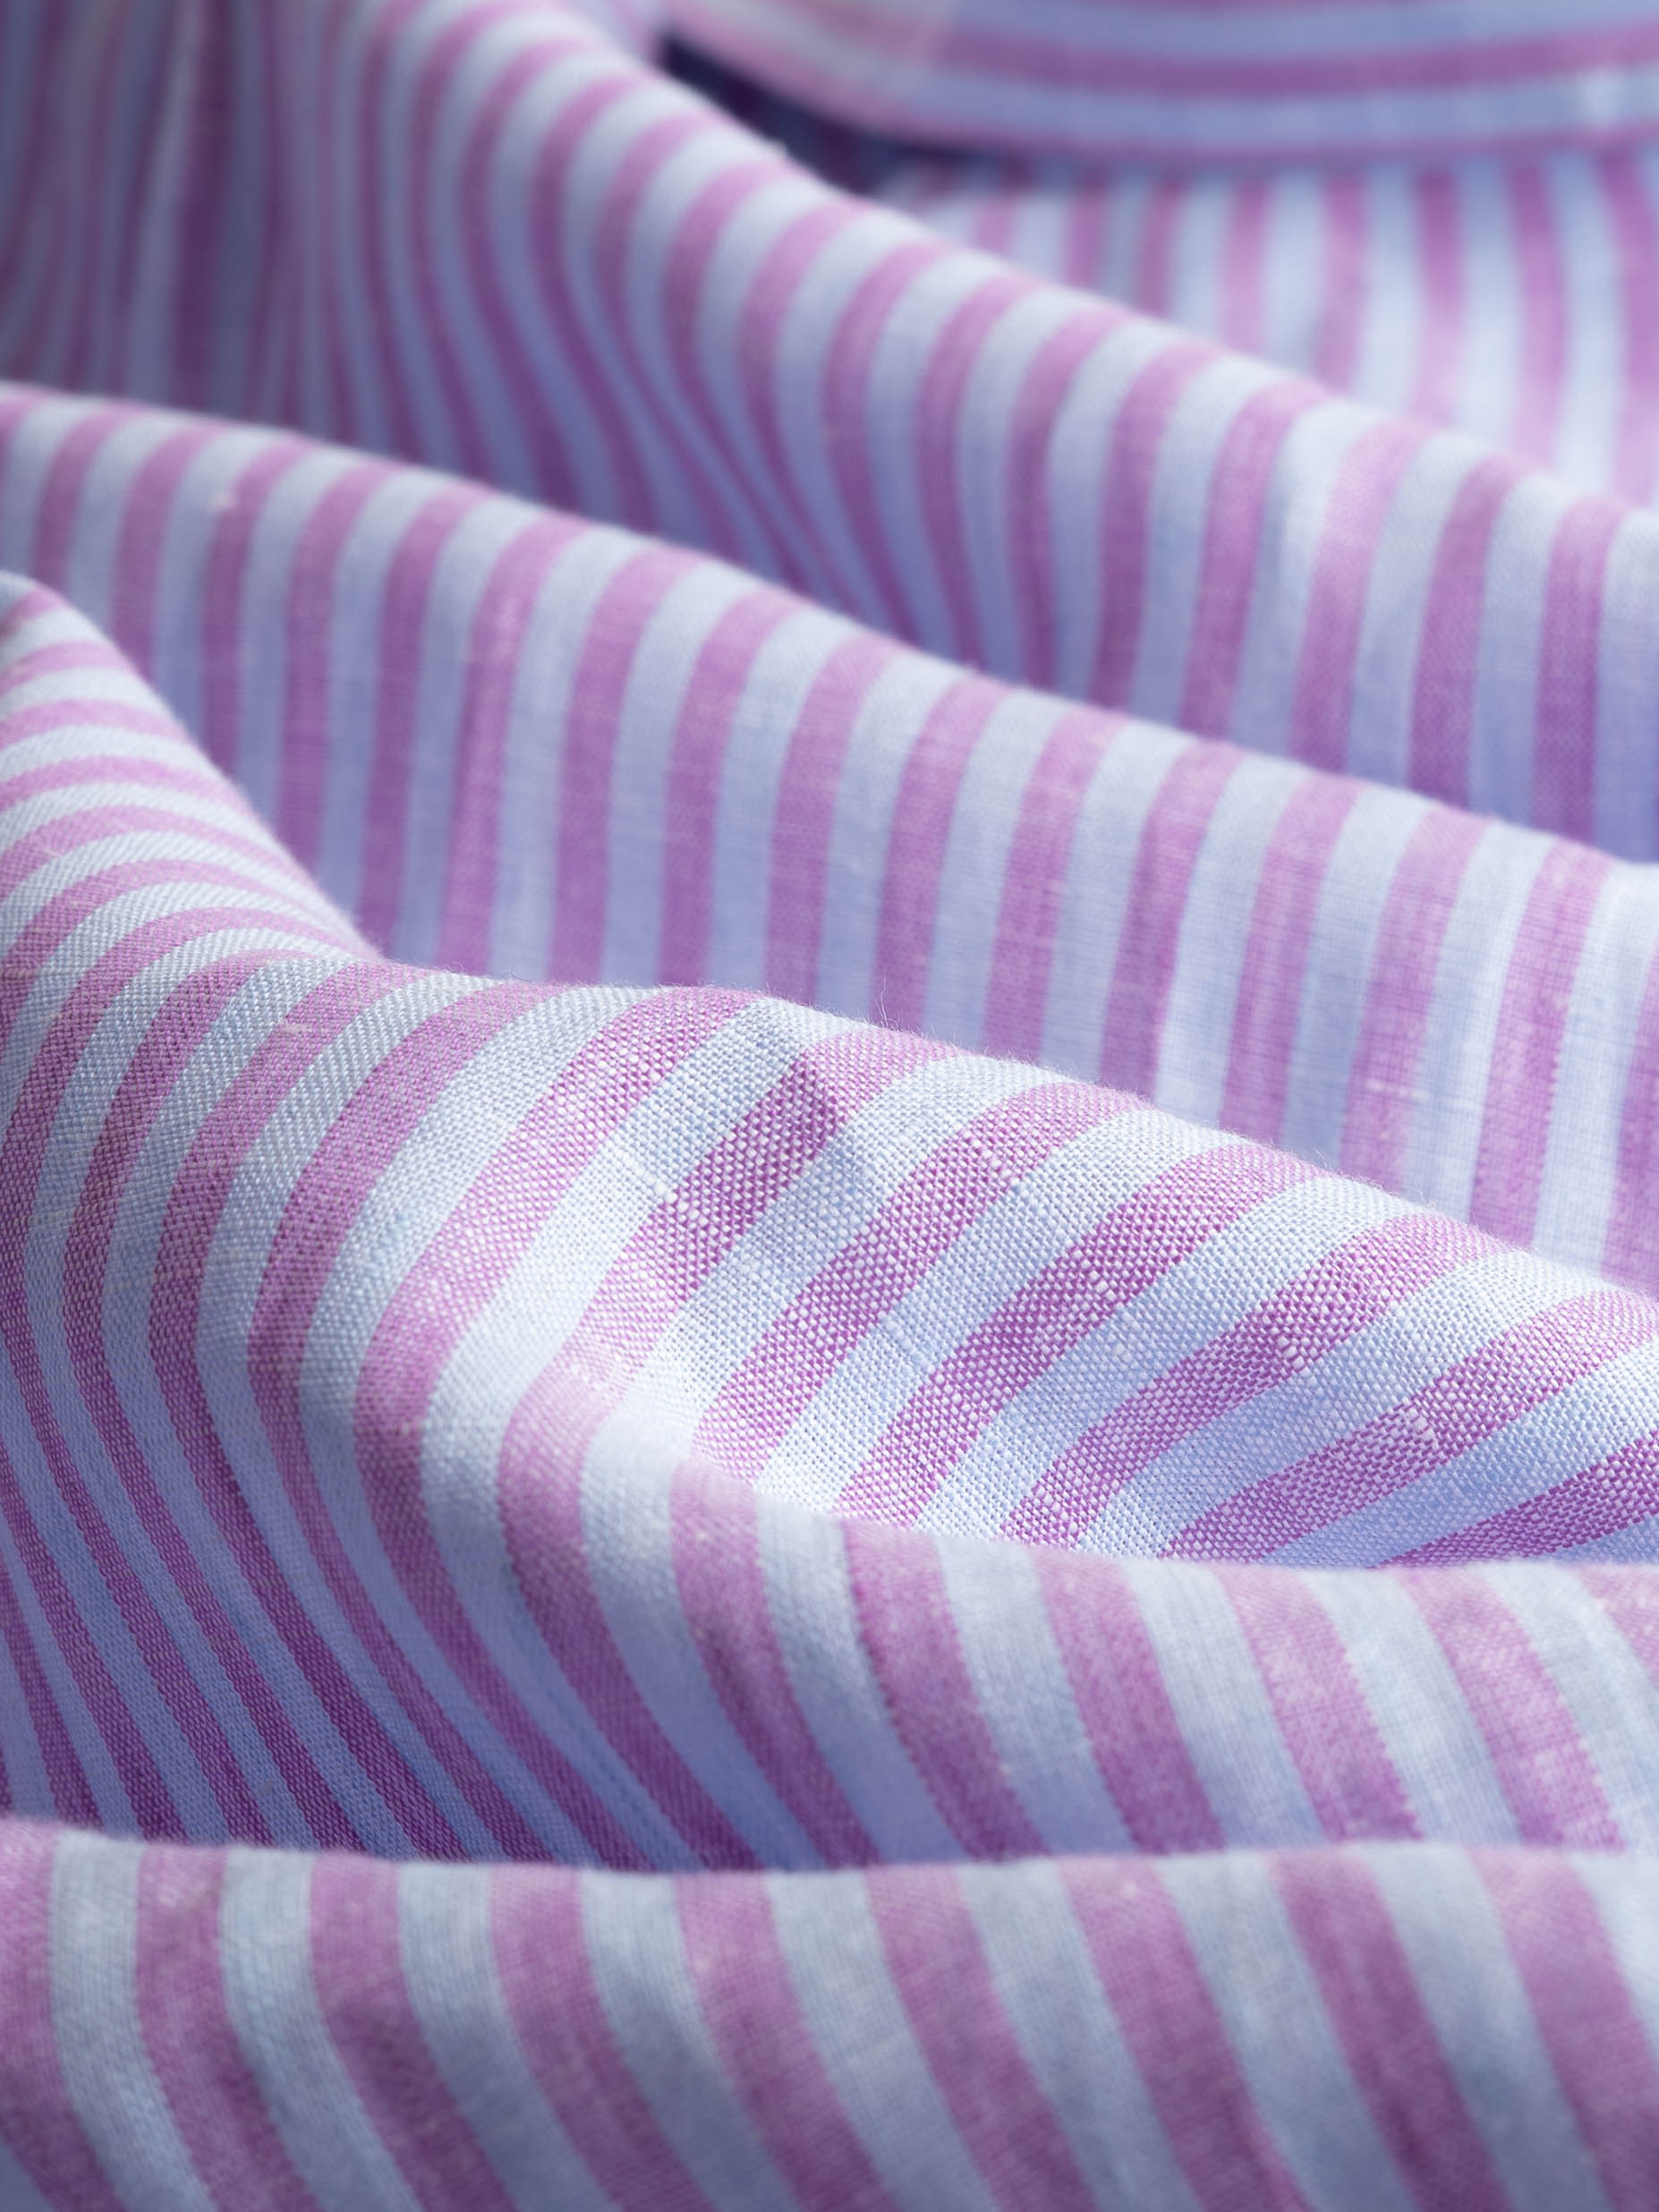 SHIRT PURPLE AND BLUE LINEN STRIPED FABRIC DETAIL